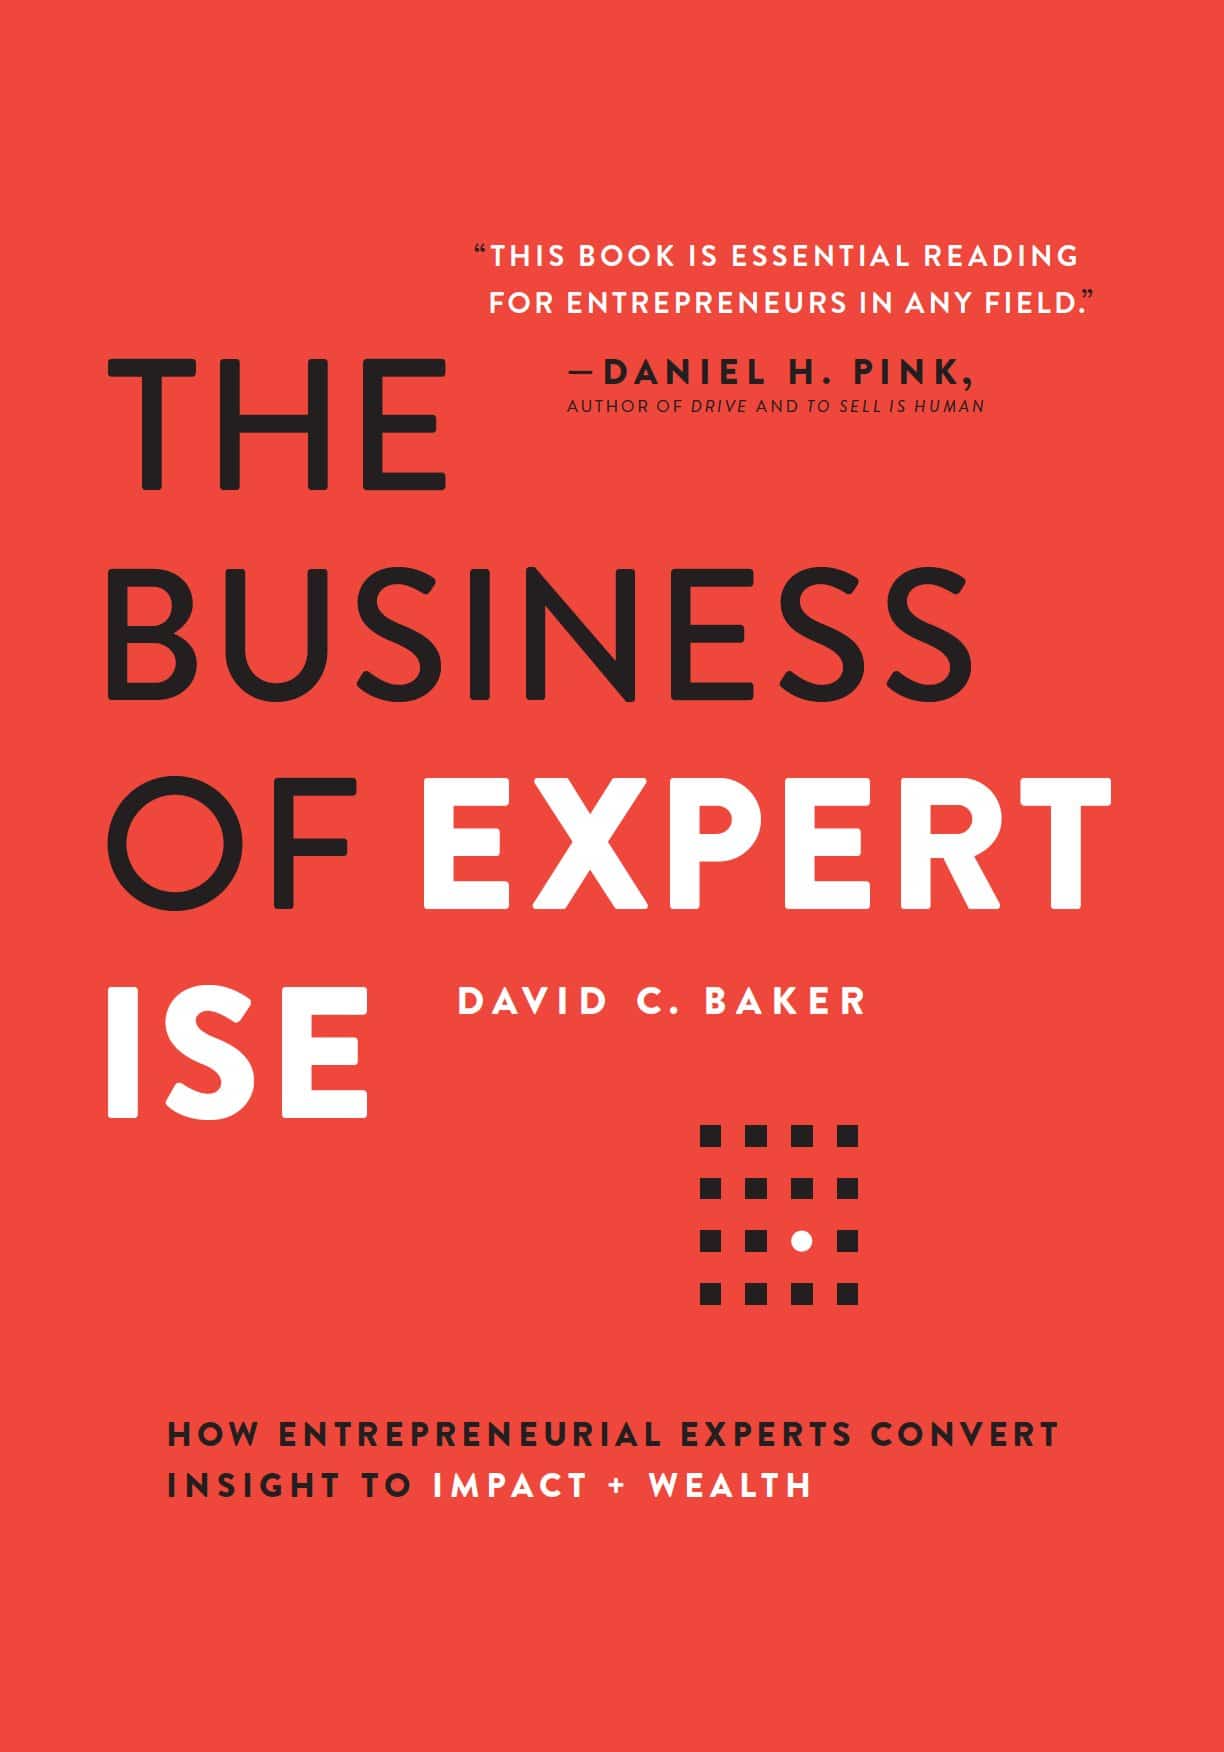 <br /></noscript>
The Business of Expertise: How Entrepreneurial Experts Convert Insight to Impact + Wealth by David Baker